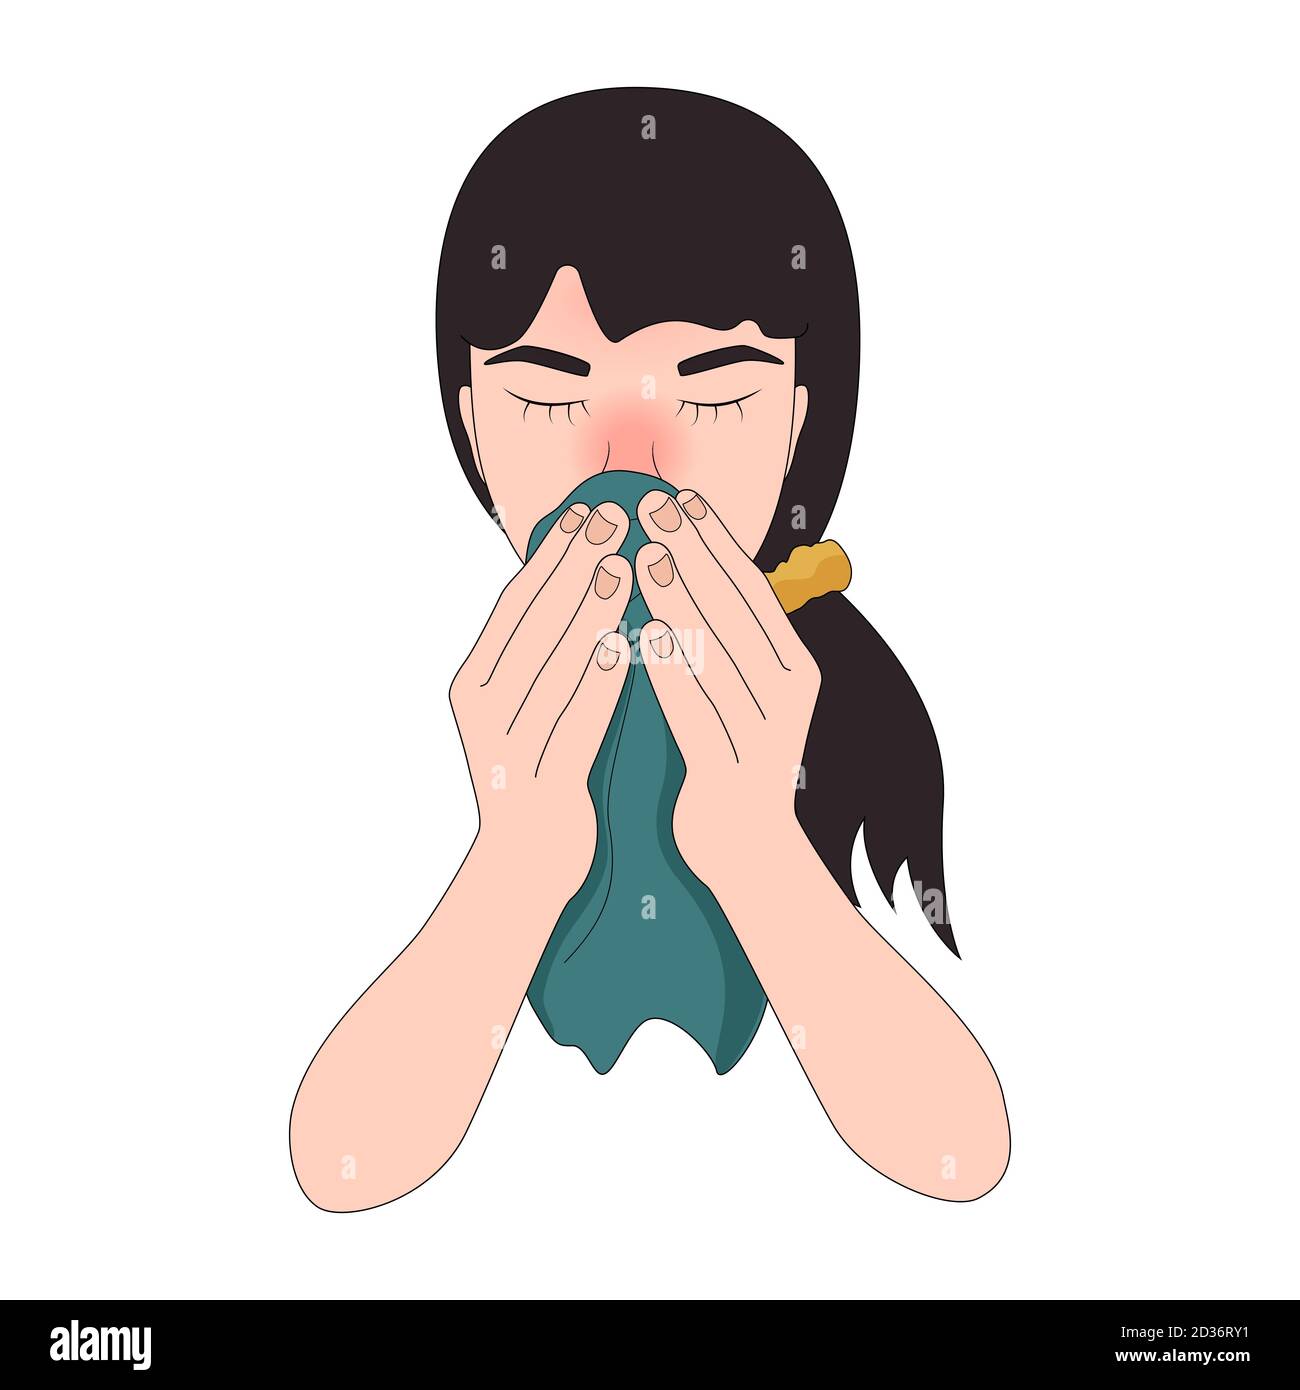 Girl with flu symptoms blowing her runny nose with a handkerchief, sneezing, vector illustration. Stock Vector